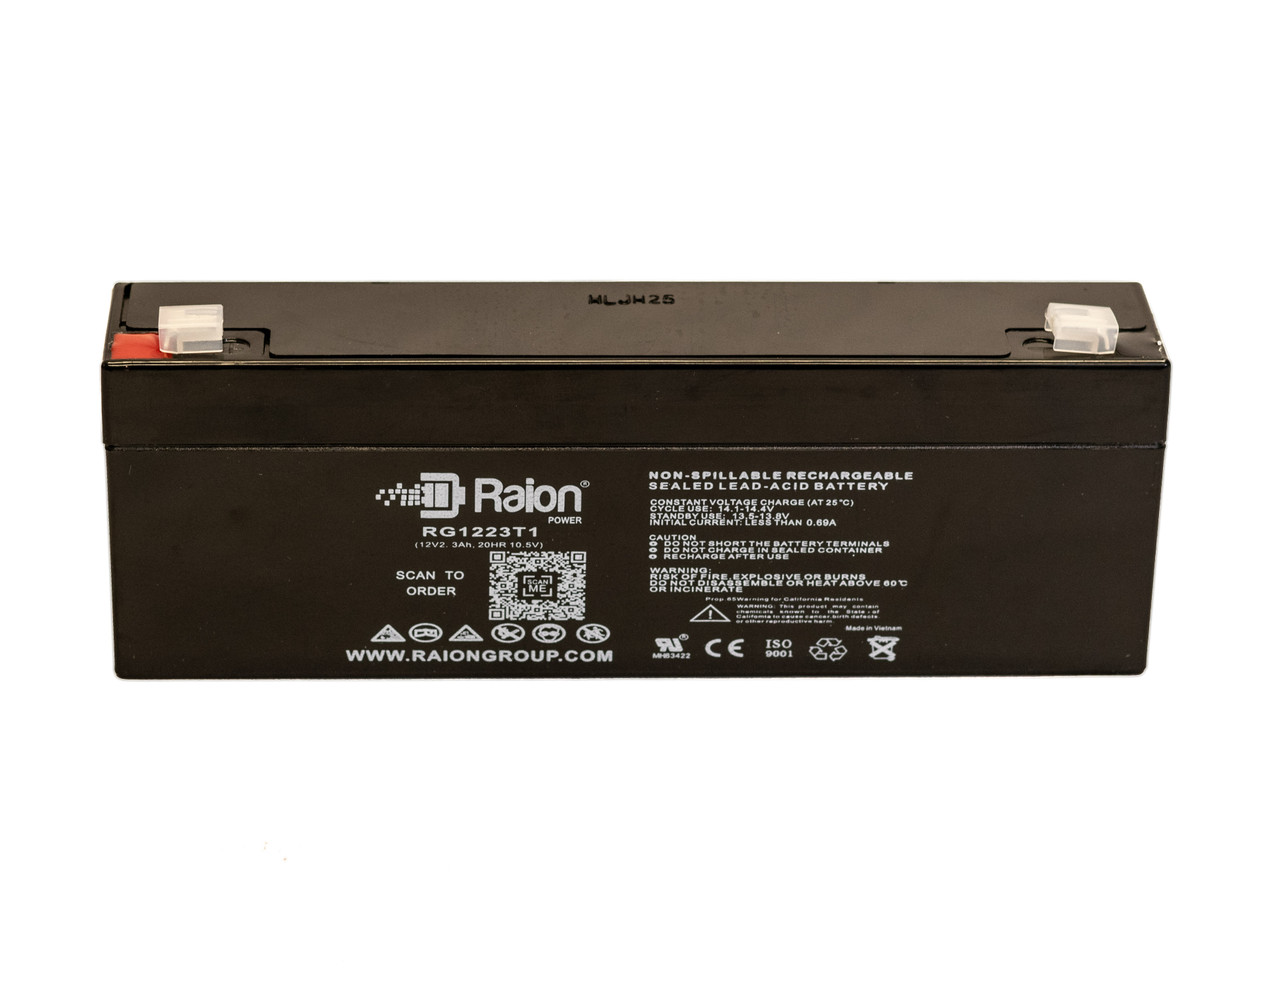 Raion Power 12V 2.3Ah SLA Battery With T1 Terminals For Datex-Ohmeda Aestiva/5 Anesthesia System